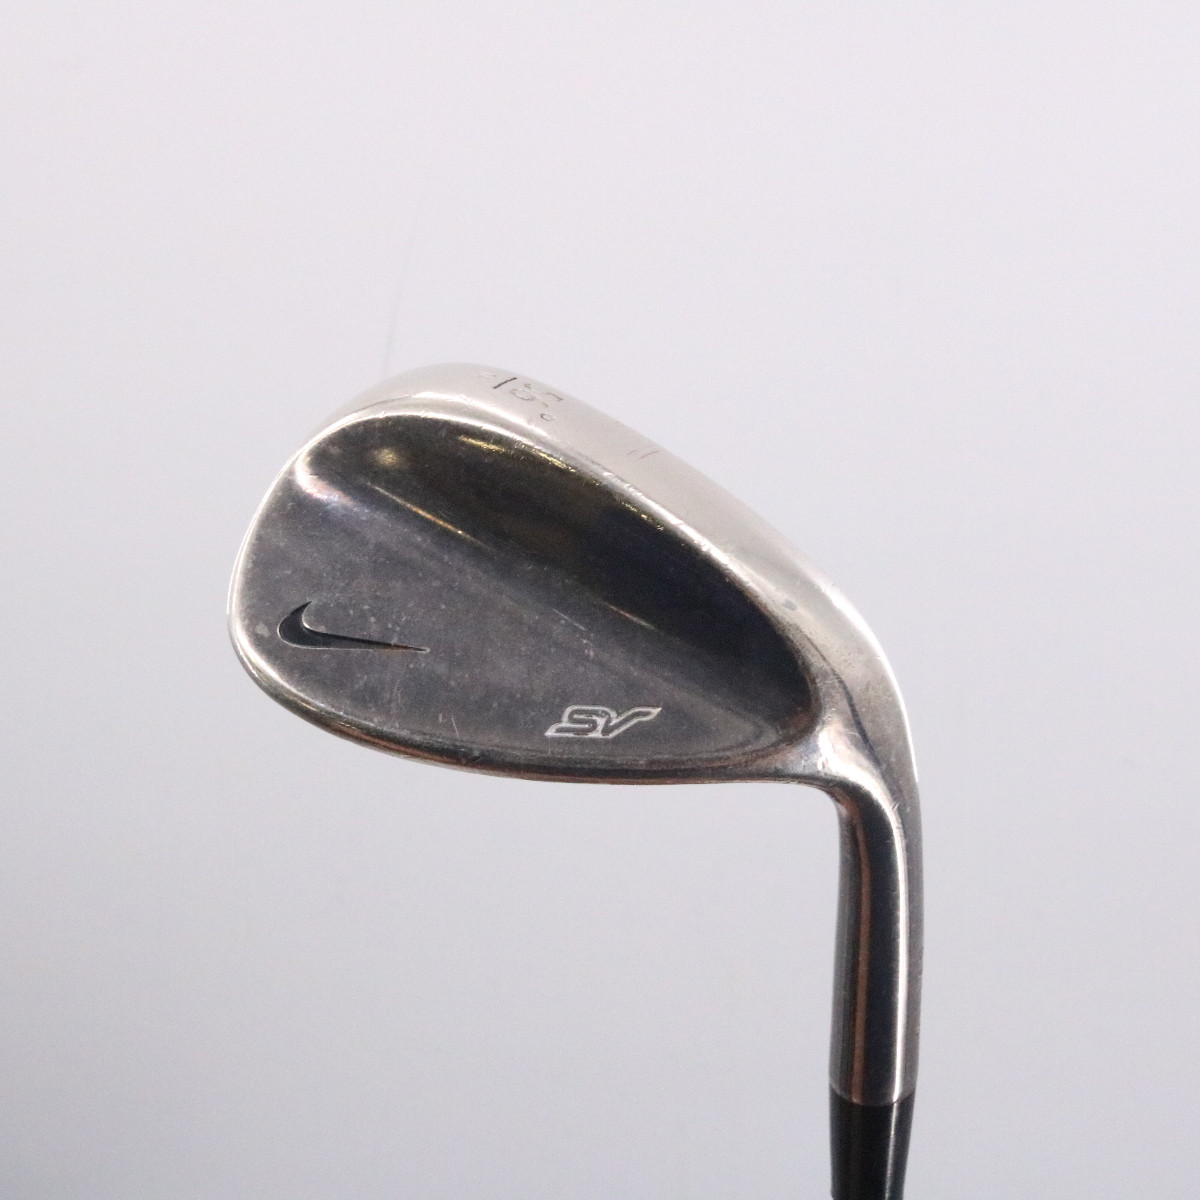 Nike SV Milled Wedge 56 Degree 56.14 Dynamic Gold S400 Stiff Right ...